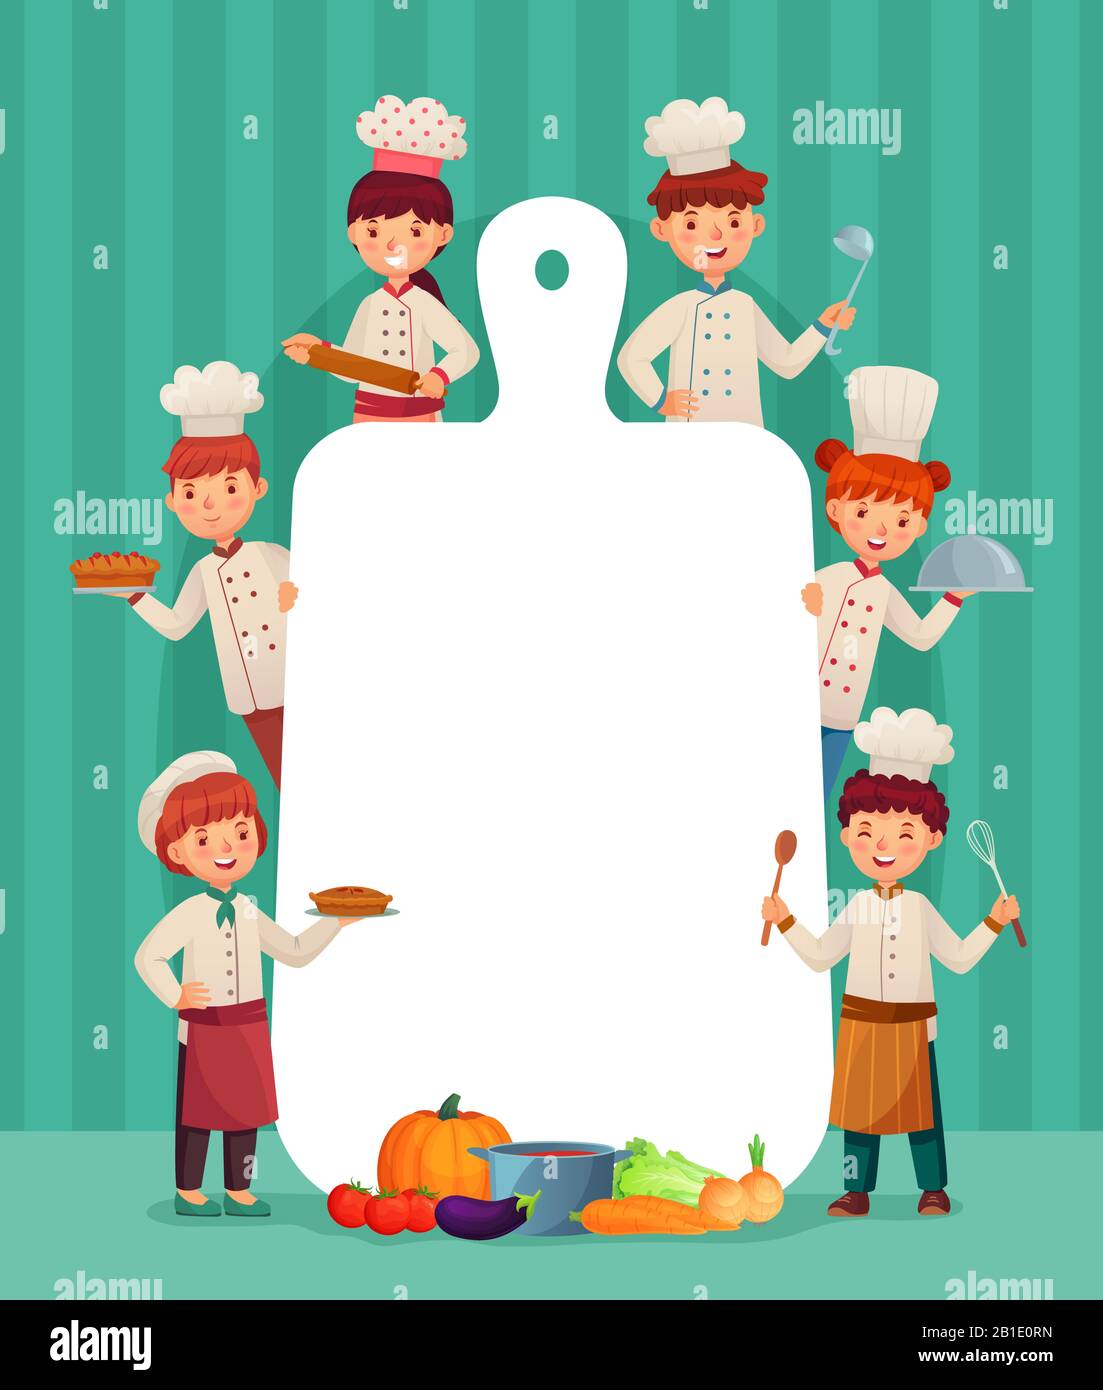 Kids menu frame. Children chefs cook with cutting board, restaurant chef and chopping food cartoon vector illustration Stock Vector